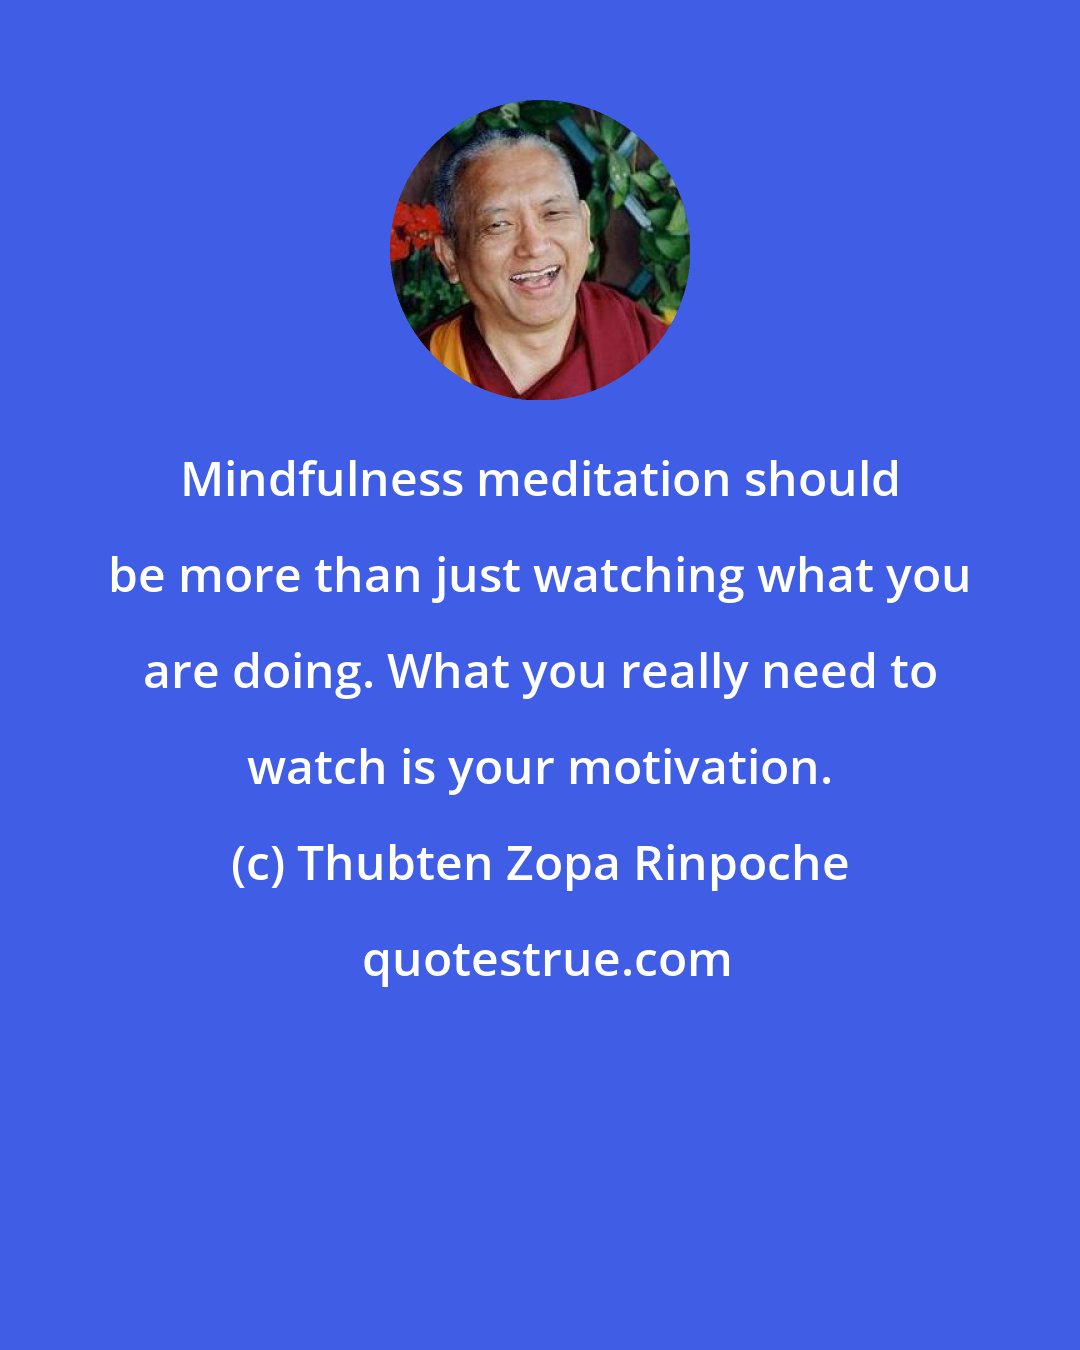 Thubten Zopa Rinpoche: Mindfulness meditation should be more than just watching what you are doing. What you really need to watch is your motivation.